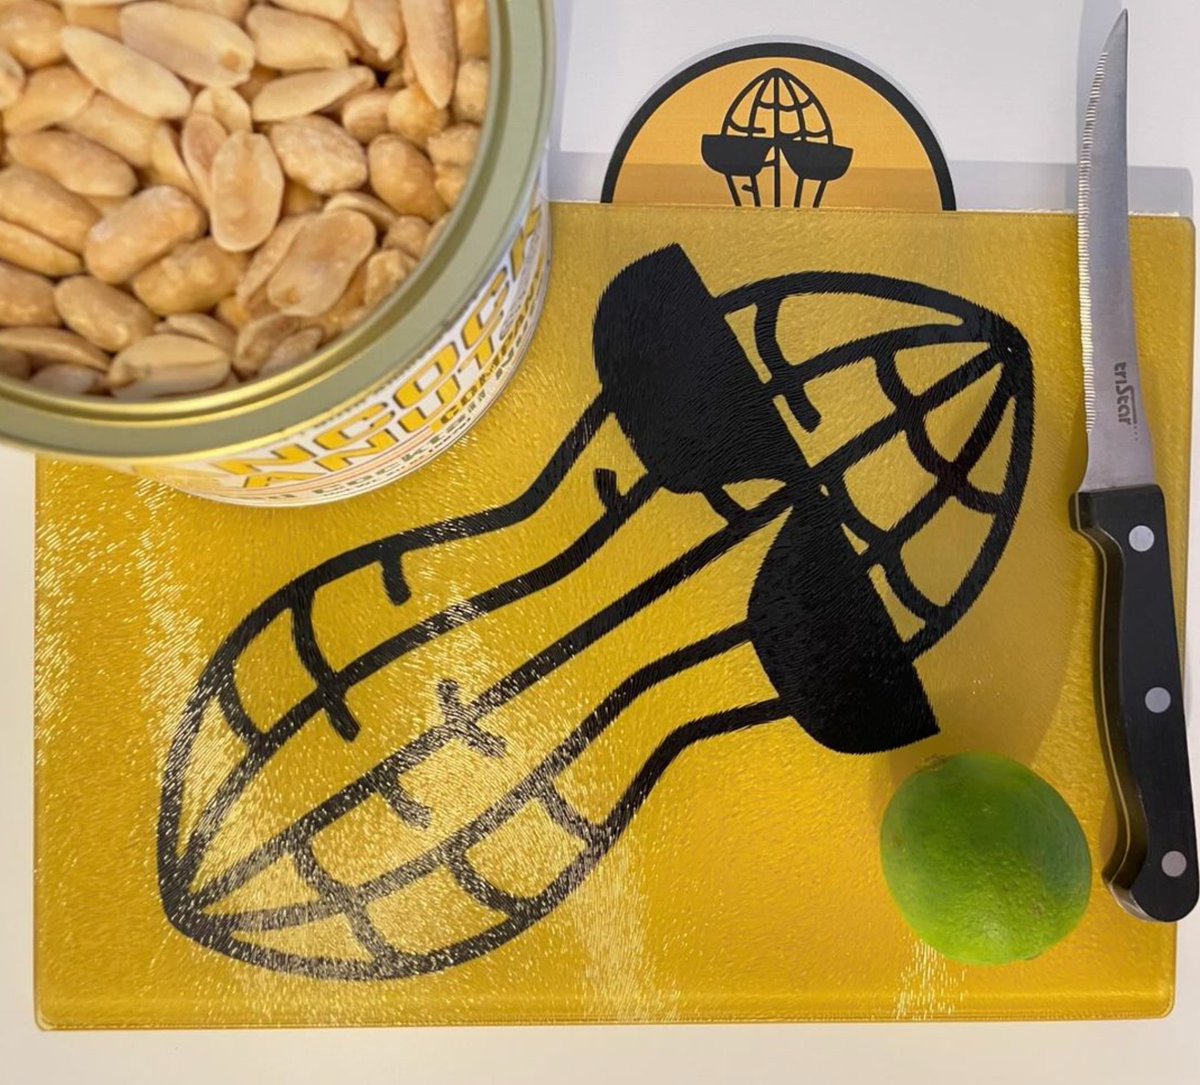 Time to cut up a little bit! 🥜🍋‍🍺

Grab a handful of Hancock Peanuts and slice some limes on our glass cutting board. Comes in ✌️sizes.

Boom:hancockpeanuts.com/product/hancoc…
#friday #weekend #lime #hancockpeanuts #Beverage

#hancockpeanuts #yeschef #cutthelimes #bartender @corona